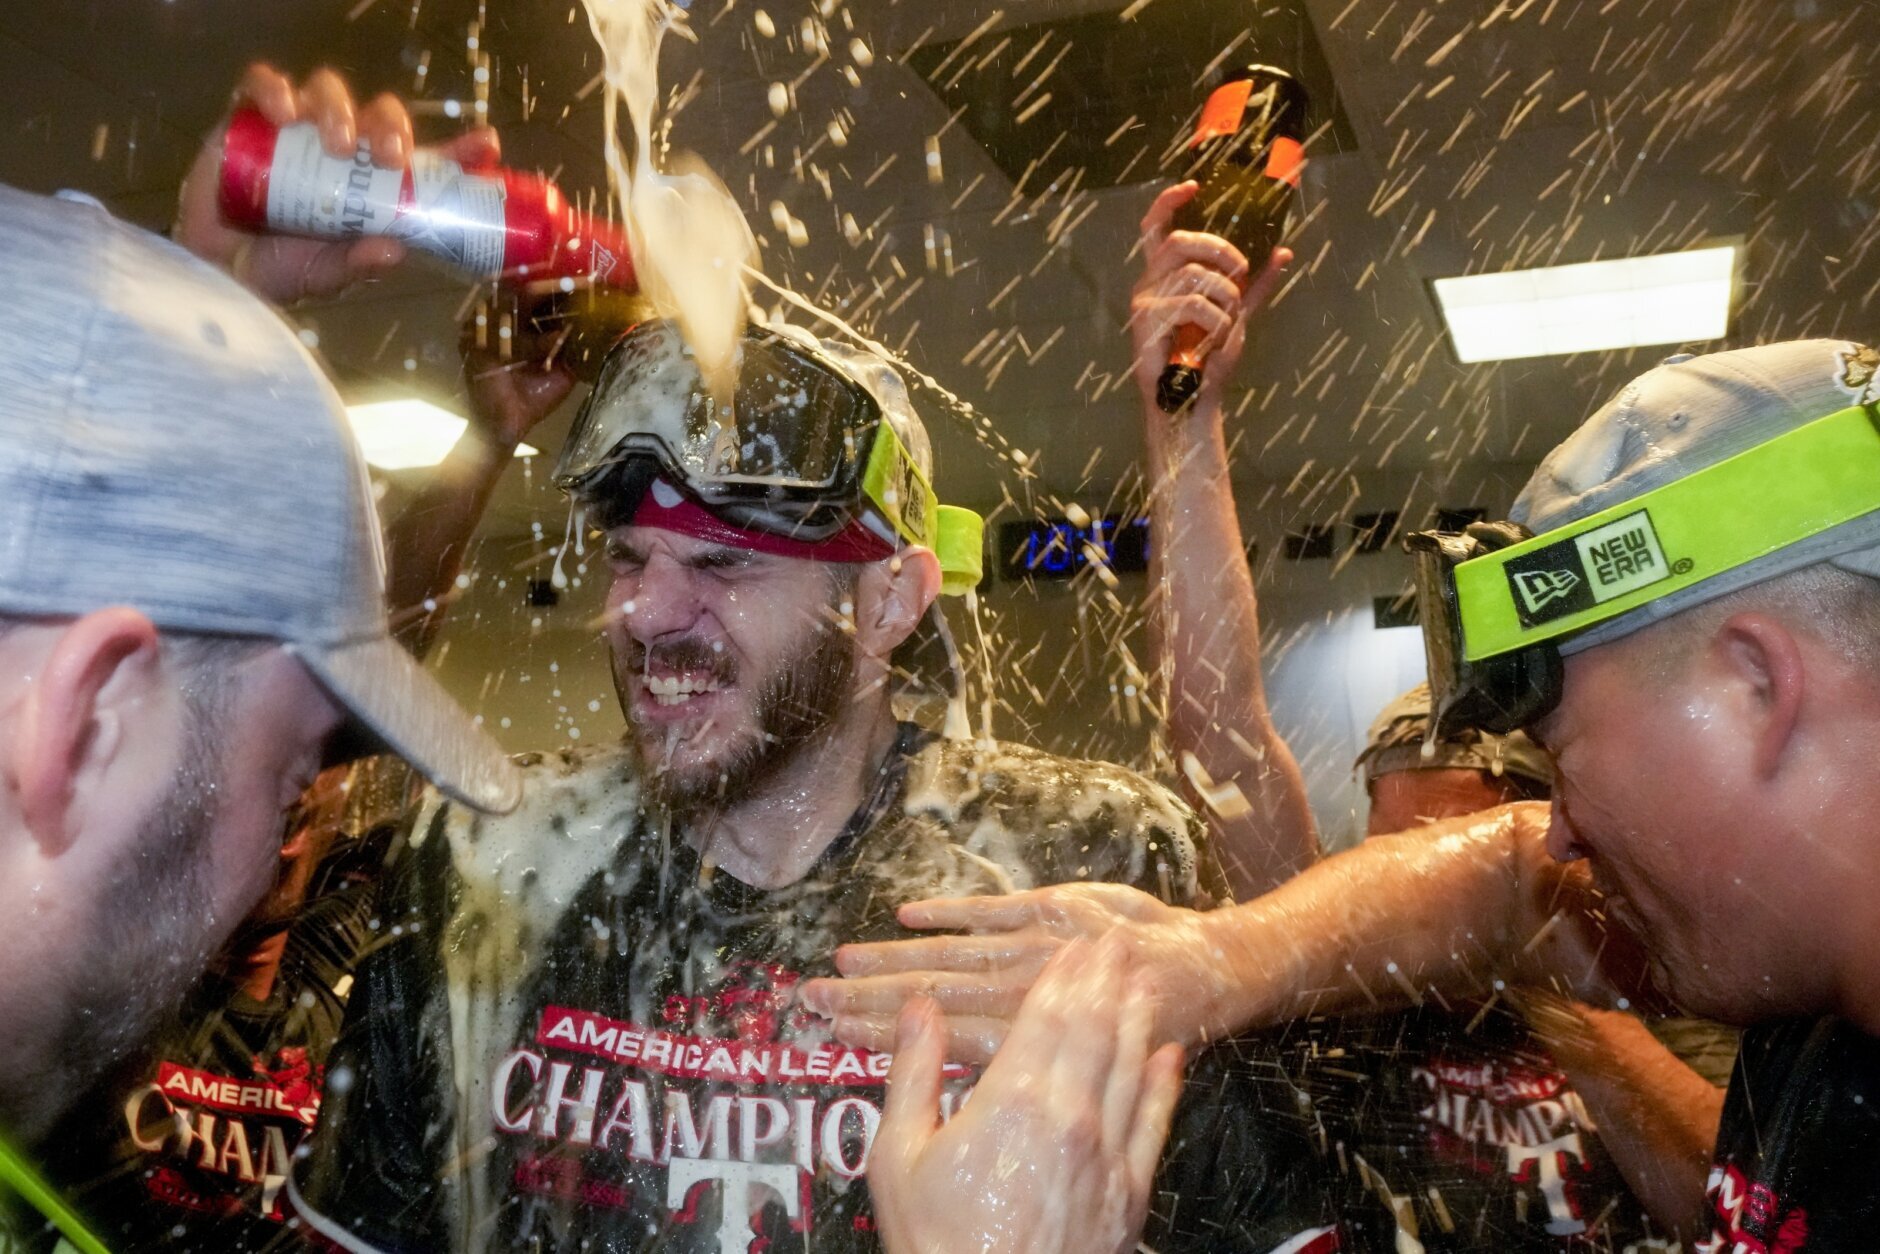 Nationals top Astros in Game 7 to win 1st World Series title - WTOP News